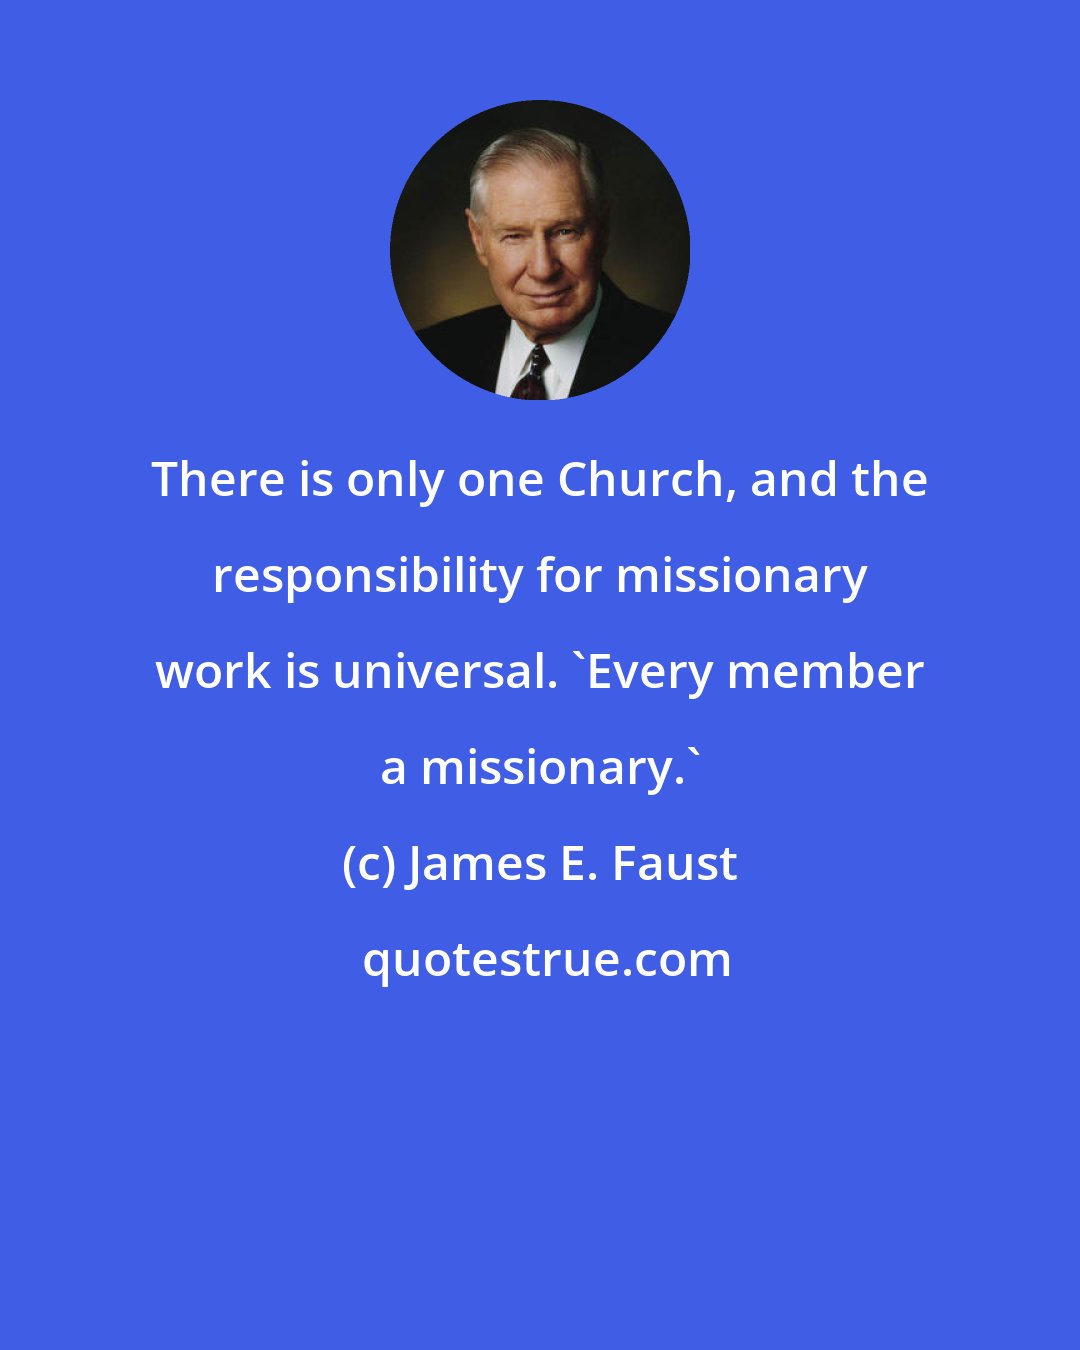 James E. Faust: There is only one Church, and the responsibility for missionary work is universal. 'Every member a missionary.'